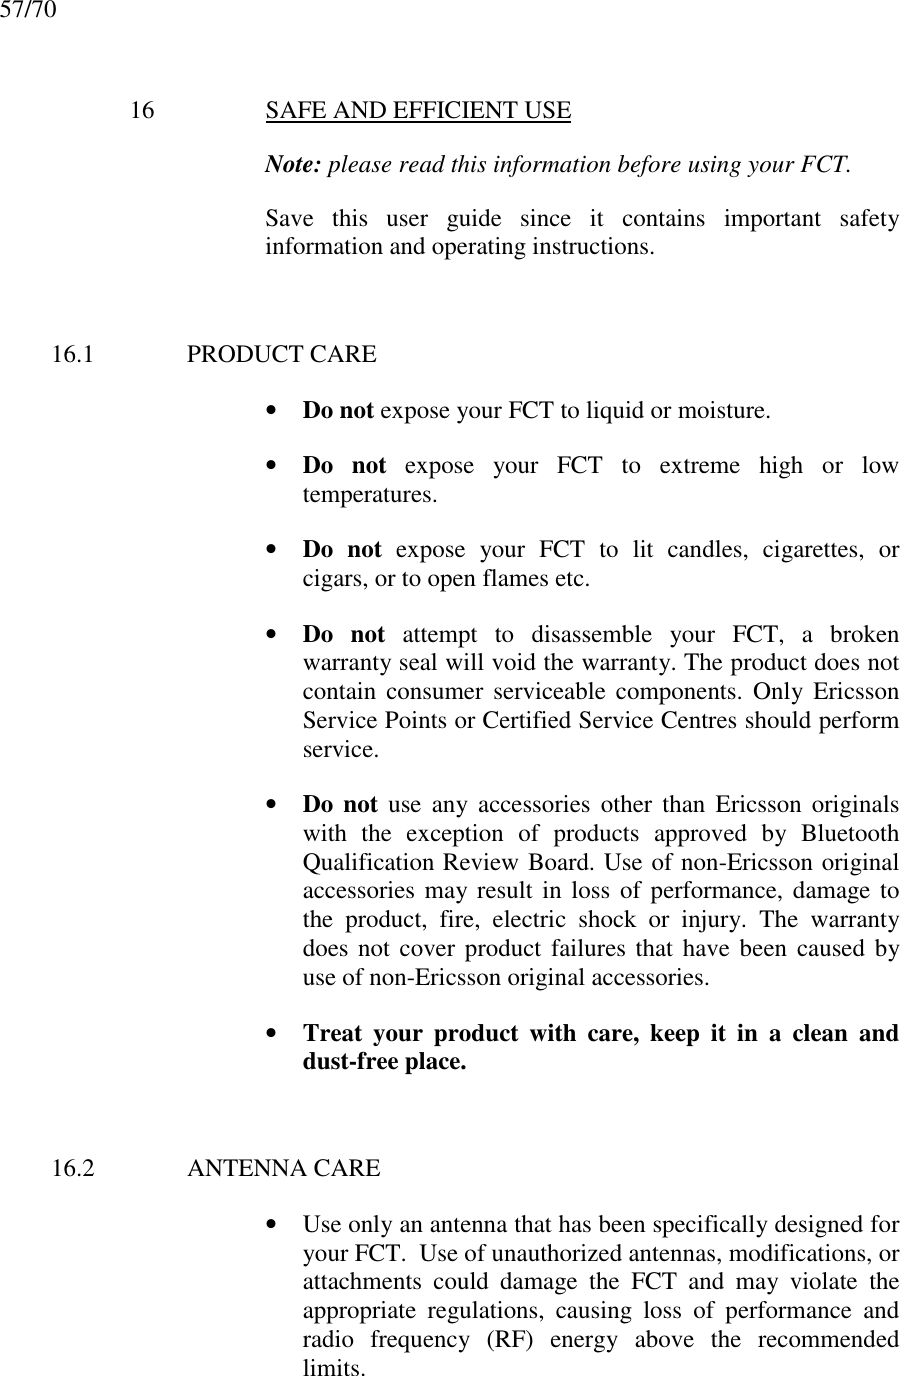 57/7016 SAFE AND EFFICIENT USENote: please read this information before using your FCT.Save this user guide since it contains important safetyinformation and operating instructions.16.1 PRODUCT CARE• Do not expose your FCT to liquid or moisture.• Do not expose your FCT to extreme high or lowtemperatures.• Do not expose your FCT to lit candles, cigarettes, orcigars, or to open flames etc.• Do not attempt to disassemble your FCT, a brokenwarranty seal will void the warranty. The product does notcontain consumer serviceable components. Only EricssonService Points or Certified Service Centres should performservice.• Do not use any accessories other than Ericsson originalswith the exception of products approved by BluetoothQualification Review Board. Use of non-Ericsson originalaccessories may result in loss of performance, damage tothe product, fire, electric shock or injury. The warrantydoes not cover product failures that have been caused byuse of non-Ericsson original accessories.• Treat your product with care, keep it in a clean anddust-free place.16.2 ANTENNA CARE• Use only an antenna that has been specifically designed foryour FCT.  Use of unauthorized antennas, modifications, orattachments could damage the FCT and may violate theappropriate regulations, causing loss of performance andradio frequency (RF) energy above the recommendedlimits.